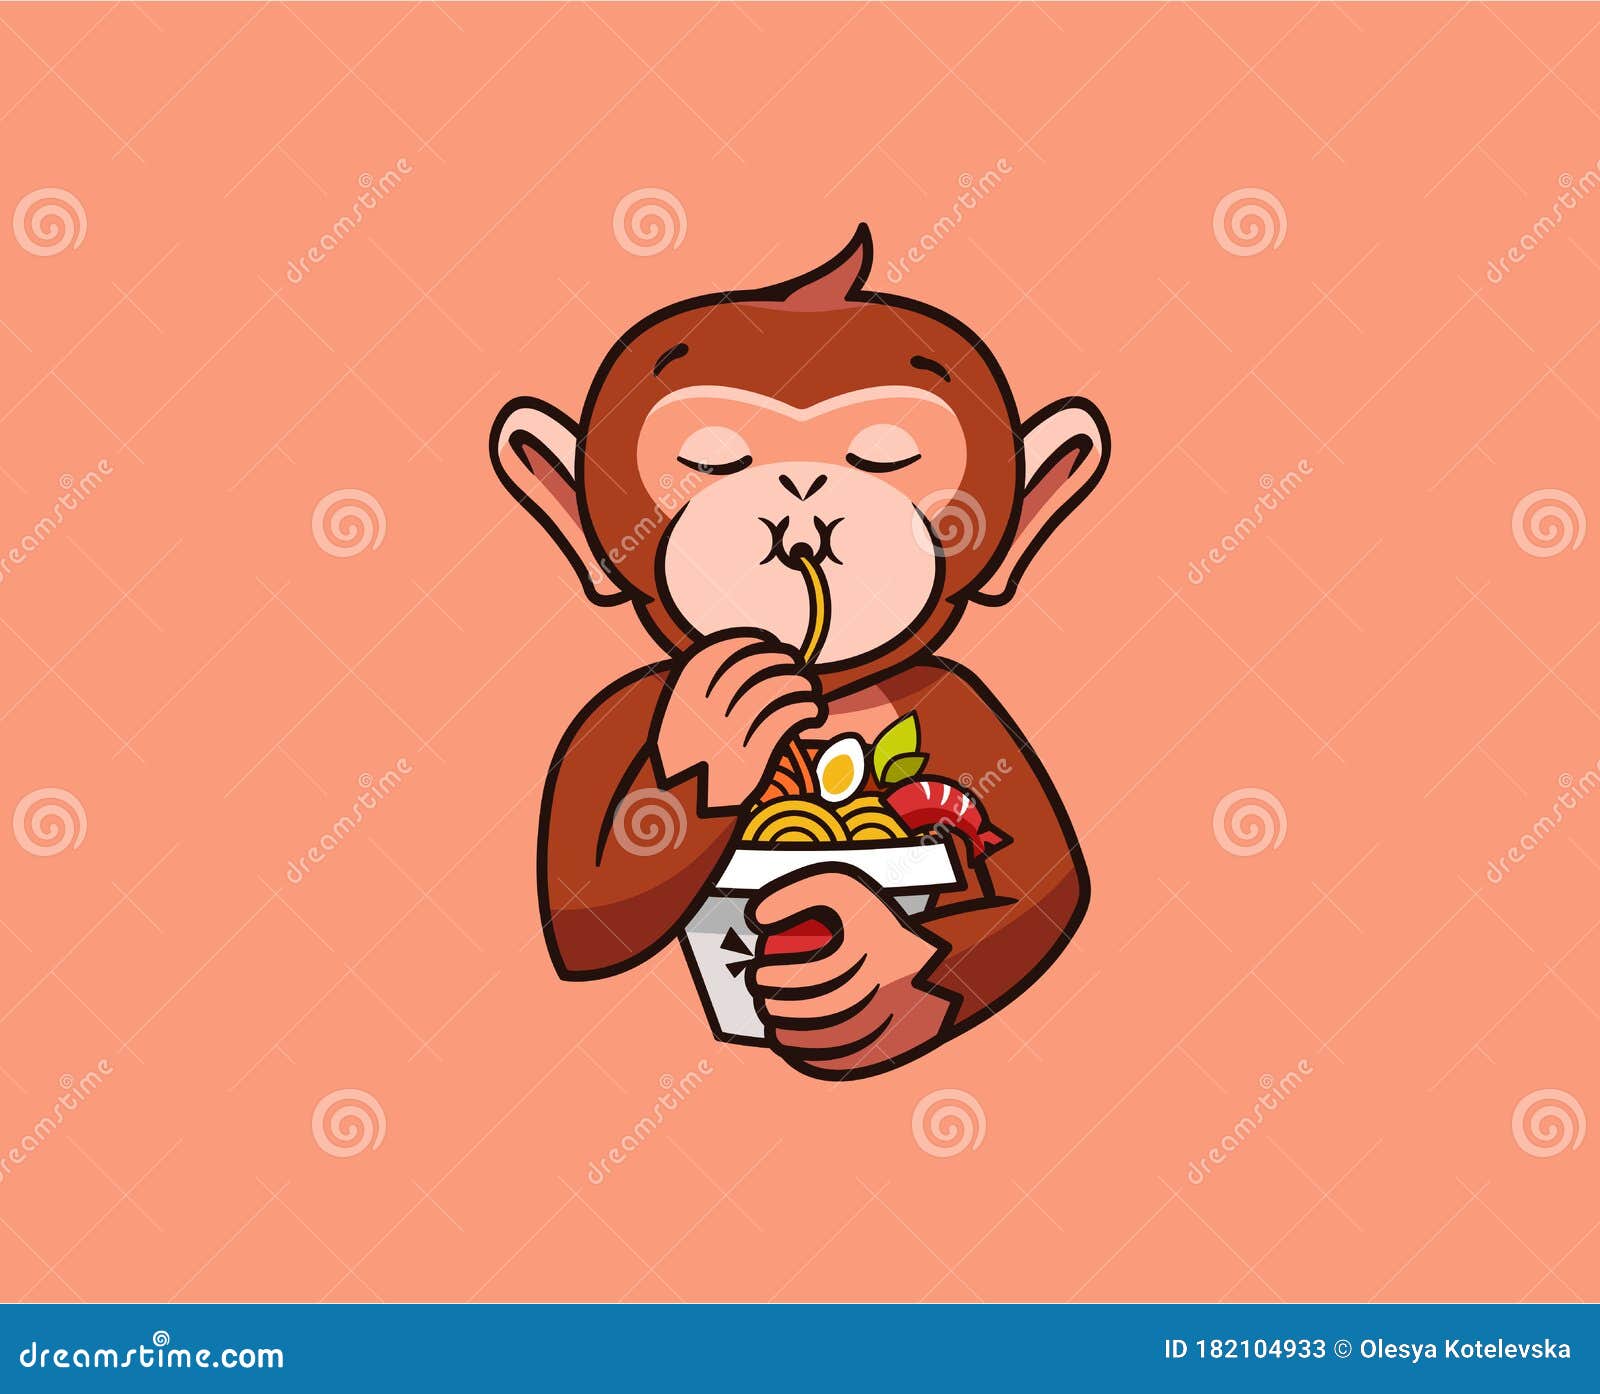 The Logo Funny Monkey Eats Noodles. Food Logotype, Cute Animal Macaque  Stock Vector - Illustration of macaque, spaghetti: 182104933